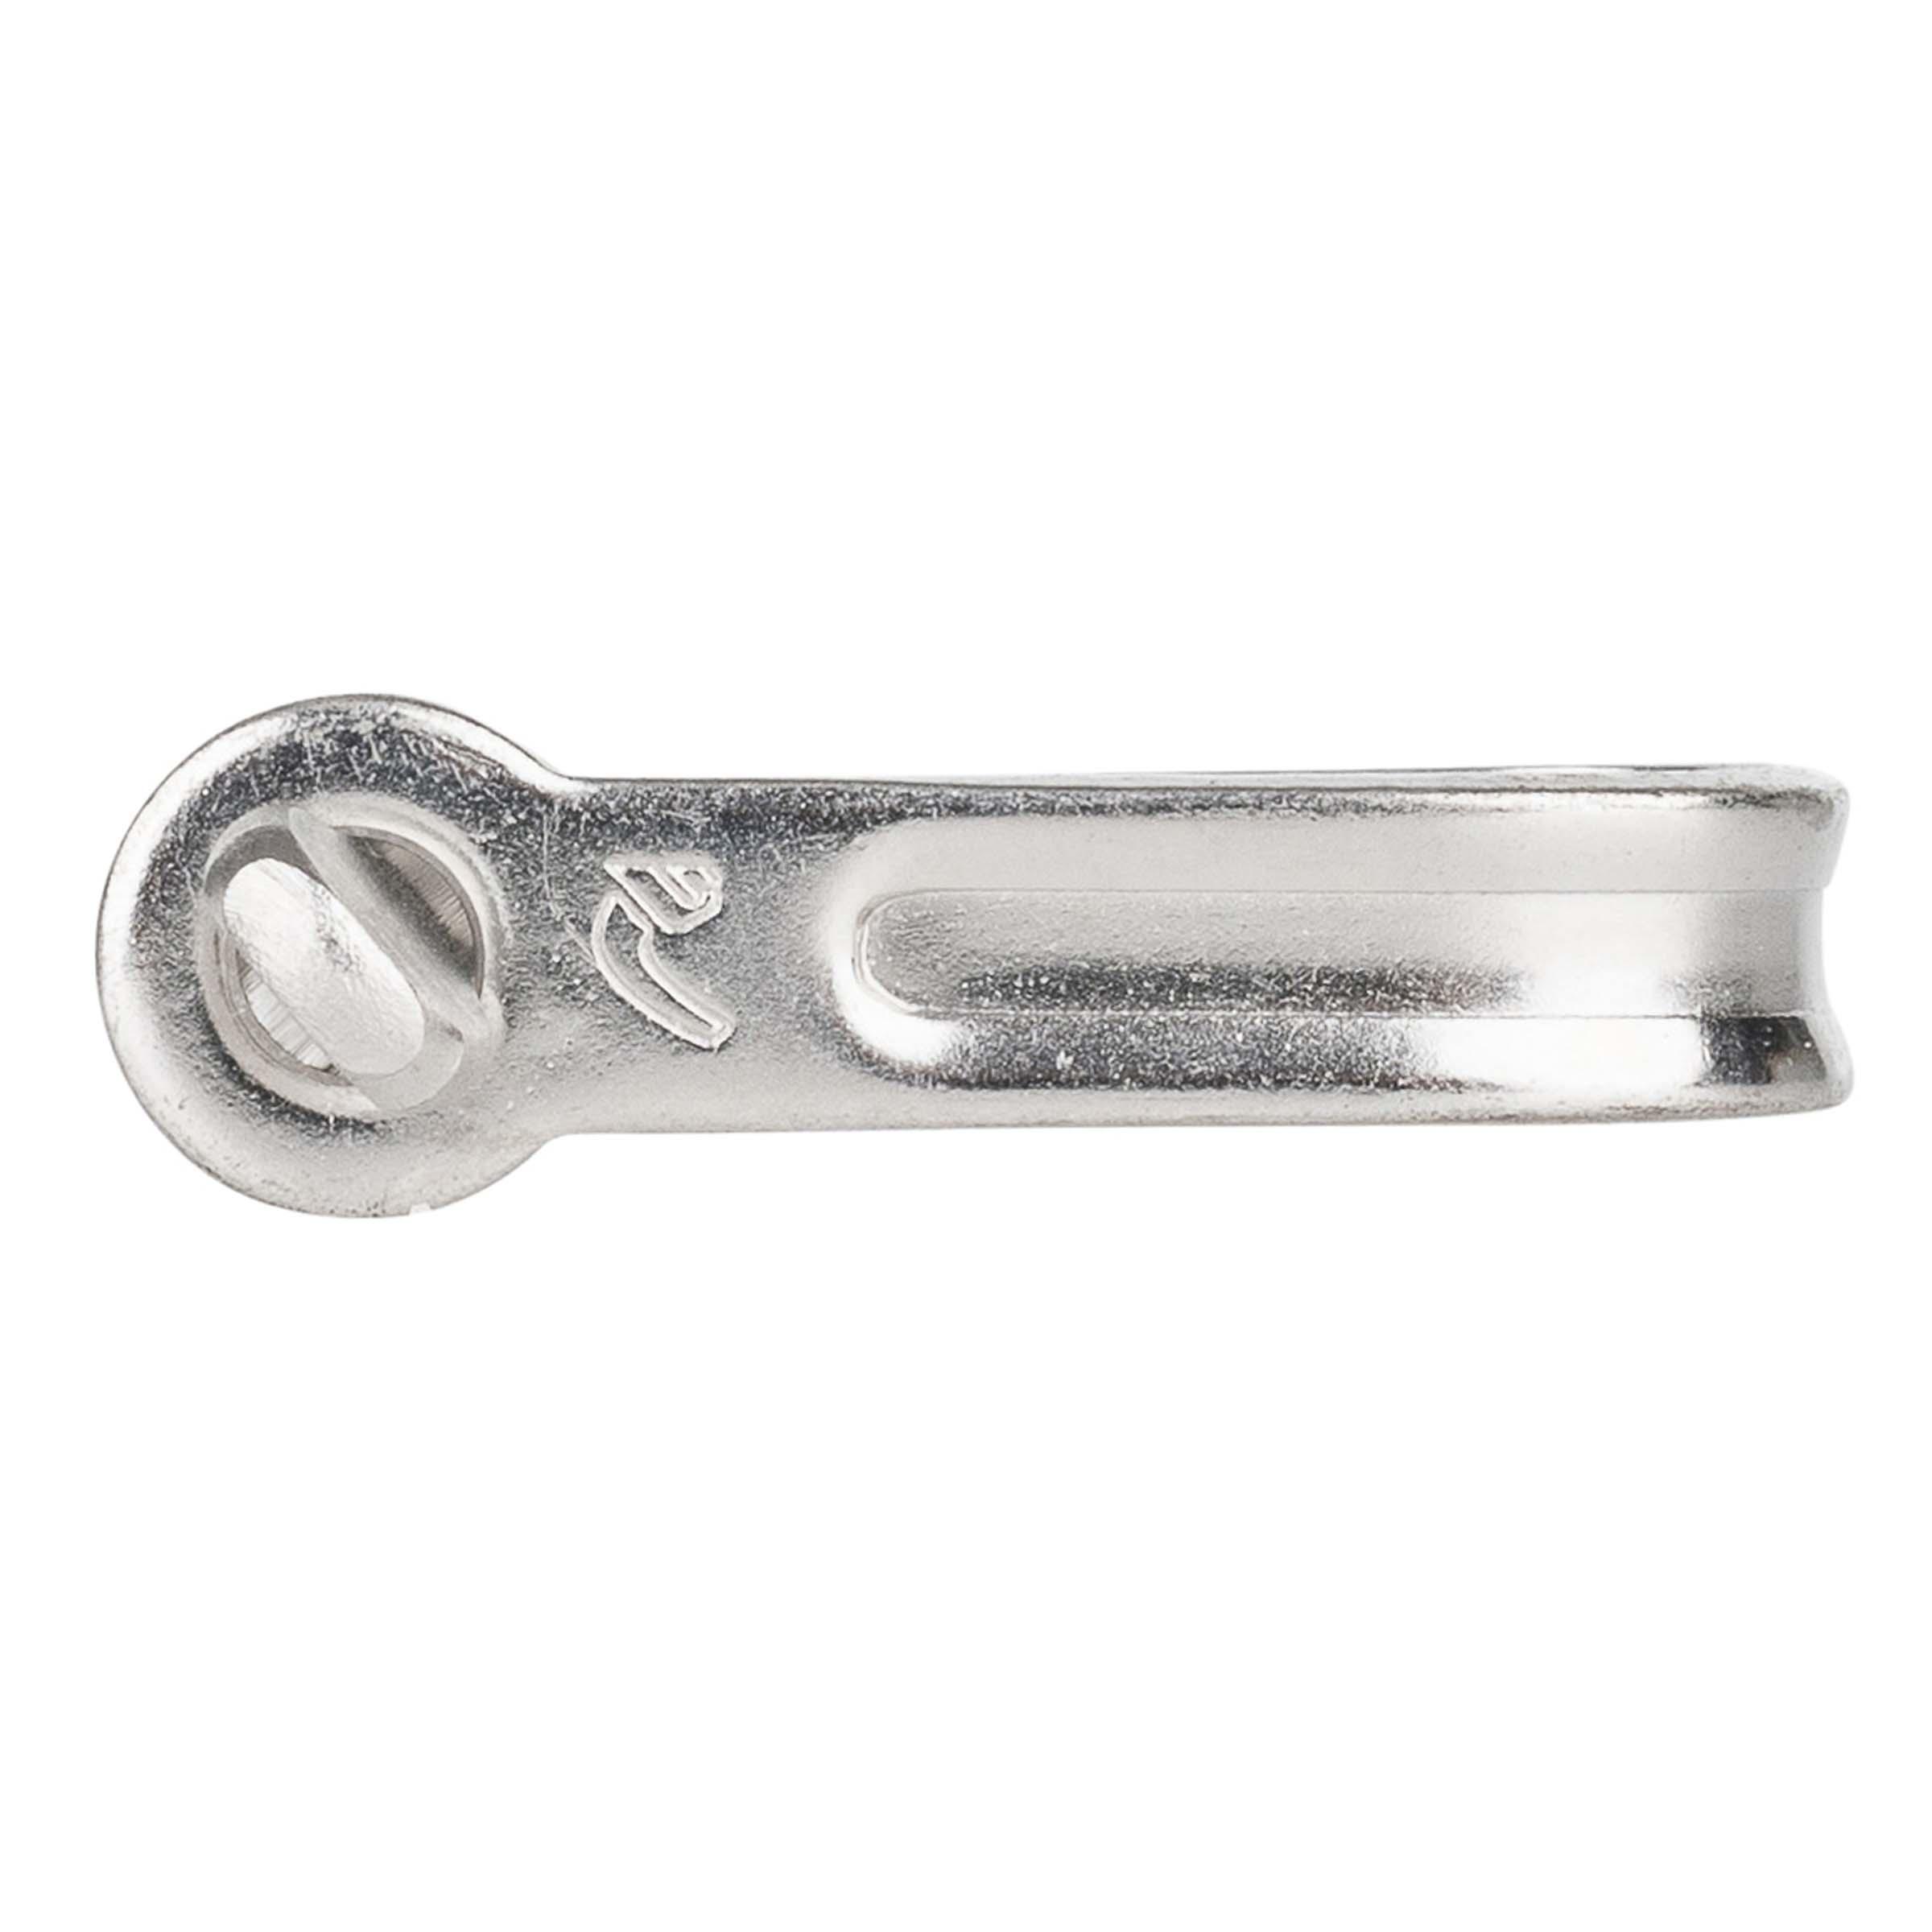 5mm stainless steel cut sailing shackle 3/4